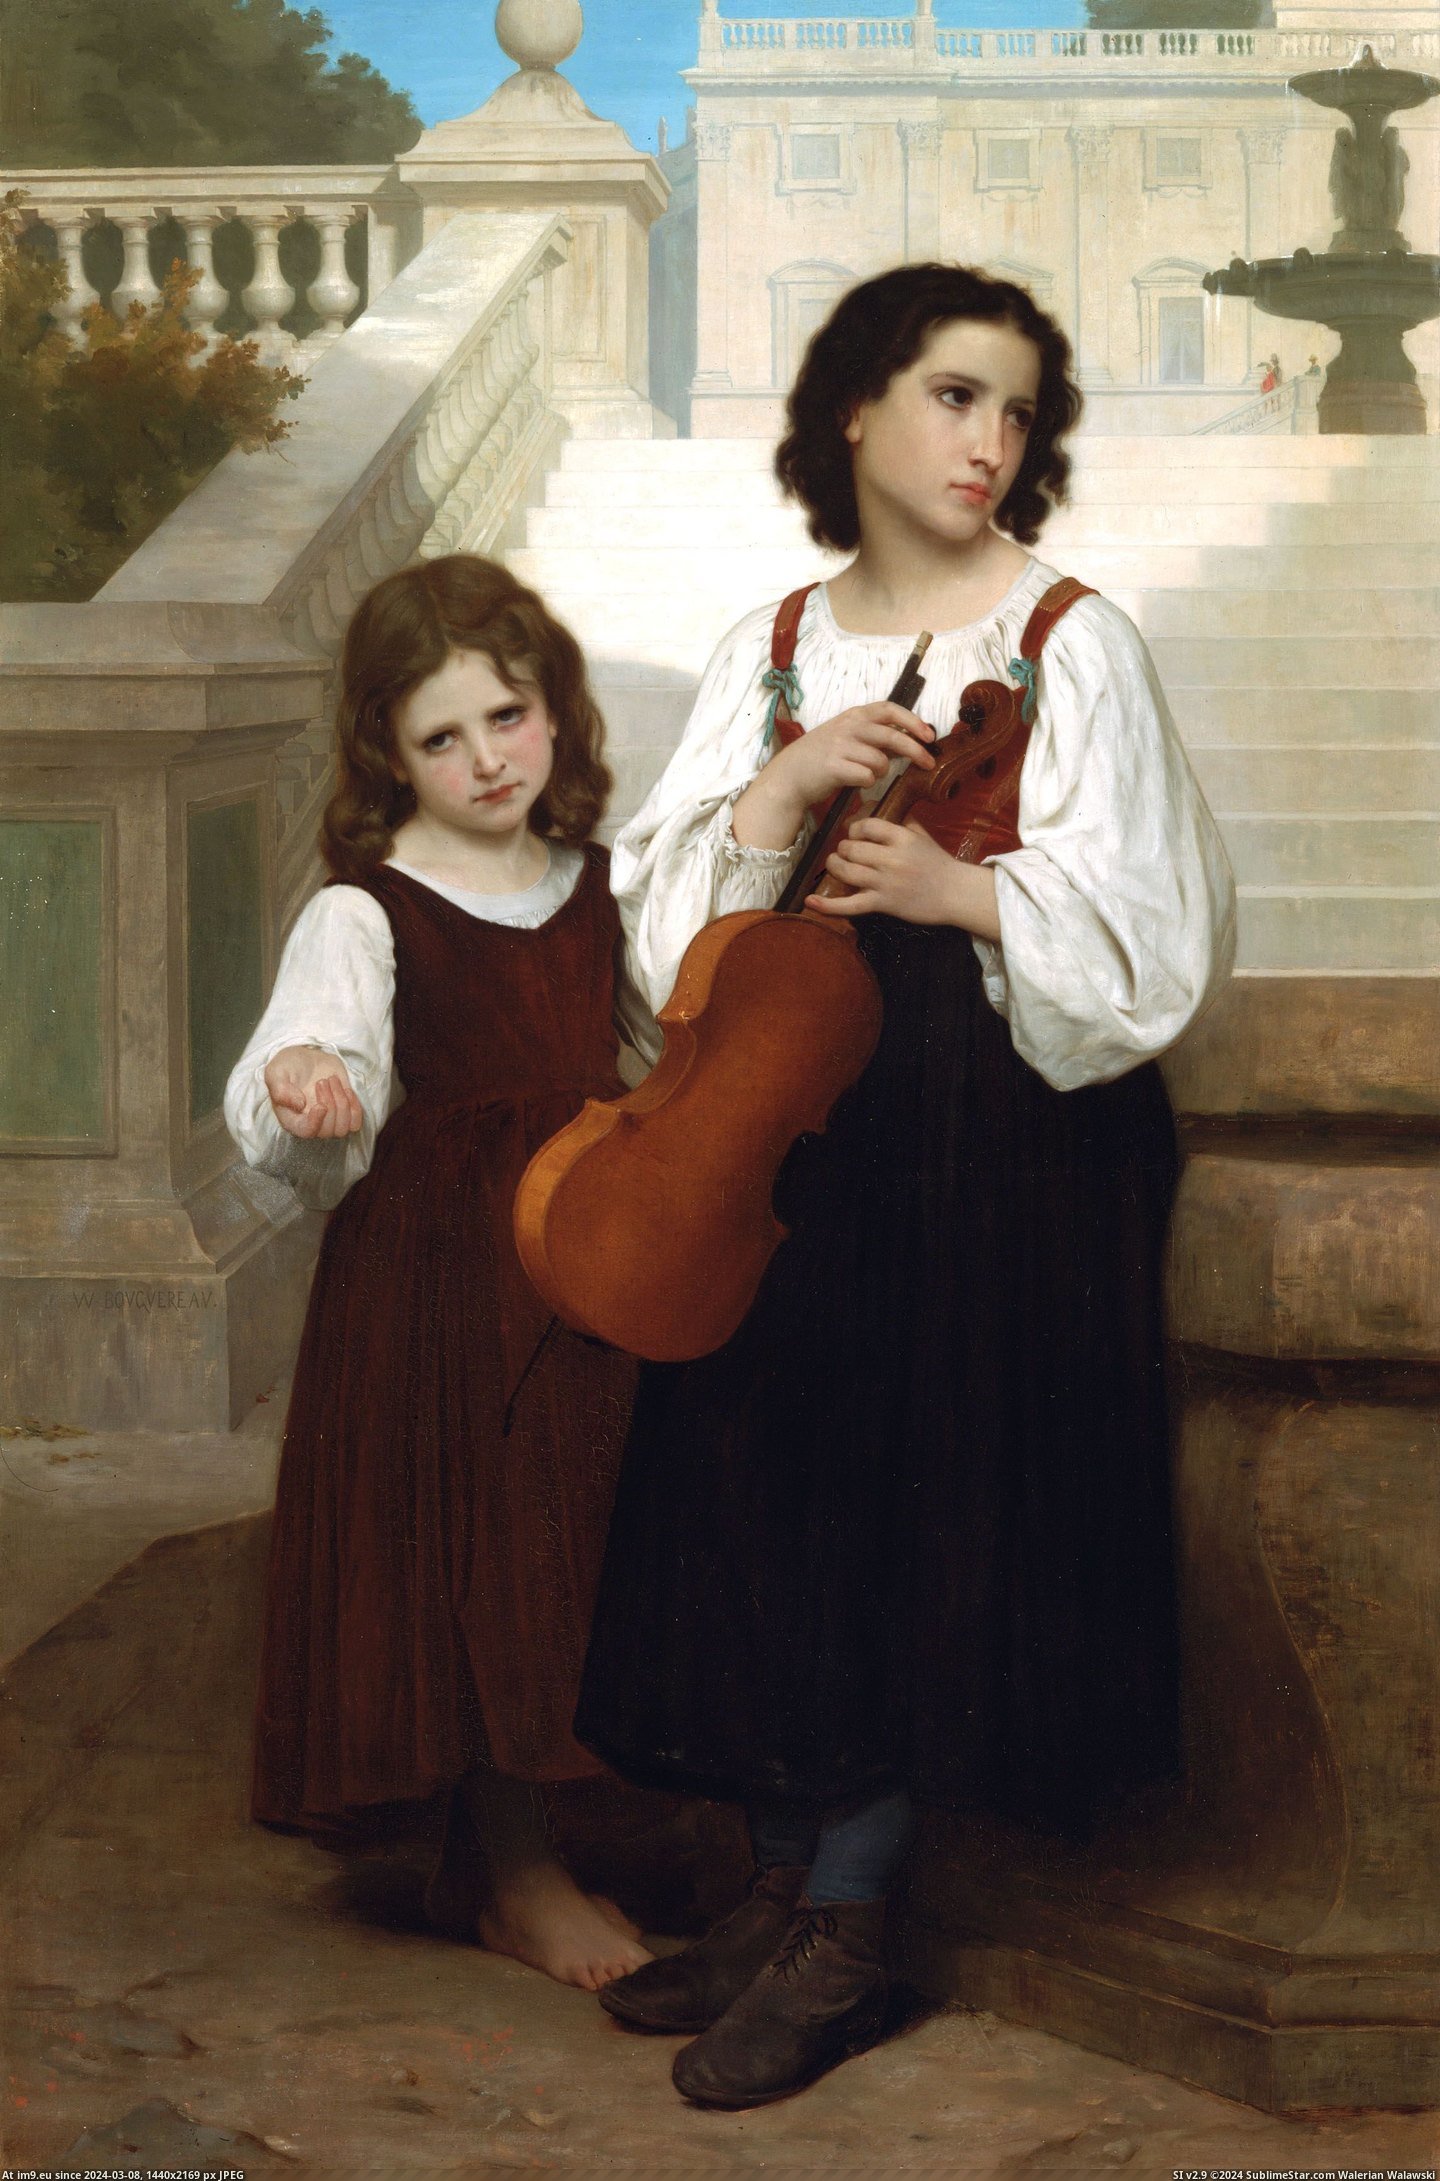 #Art #Painting #Paintings #Pays #Loin #William #Bouguereau #Adolphe (1867) Loin Du Pays - William Adolphe Bouguereau Pic. (Image of album William Adolphe Bouguereau paintings (1825-1905)))